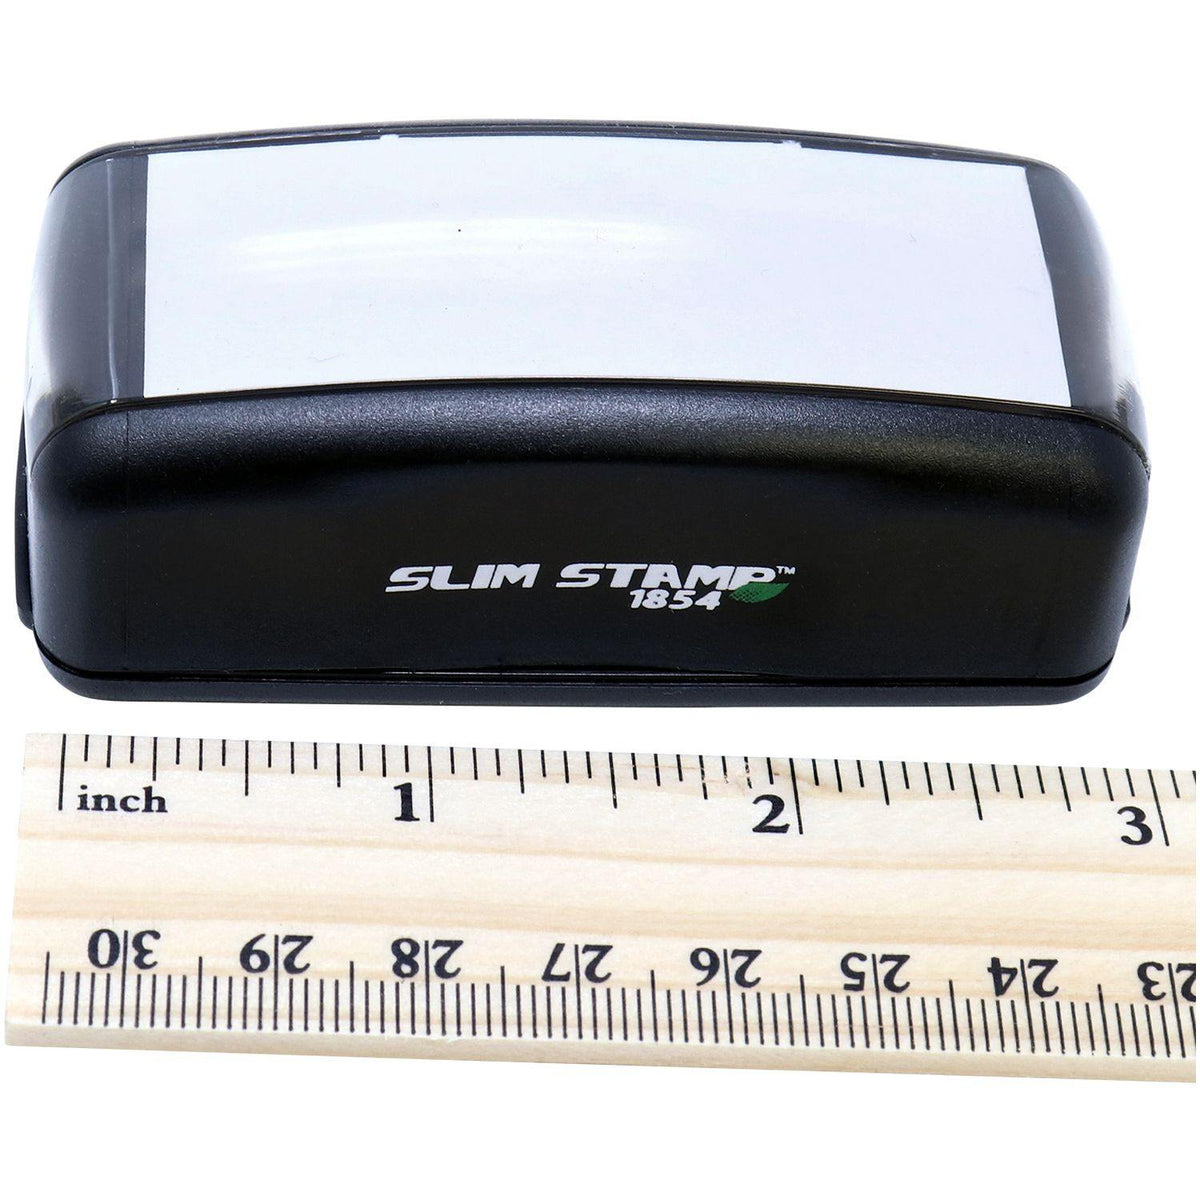 Measurement Large Pre-Inked Express Mail International Stamp with Ruler